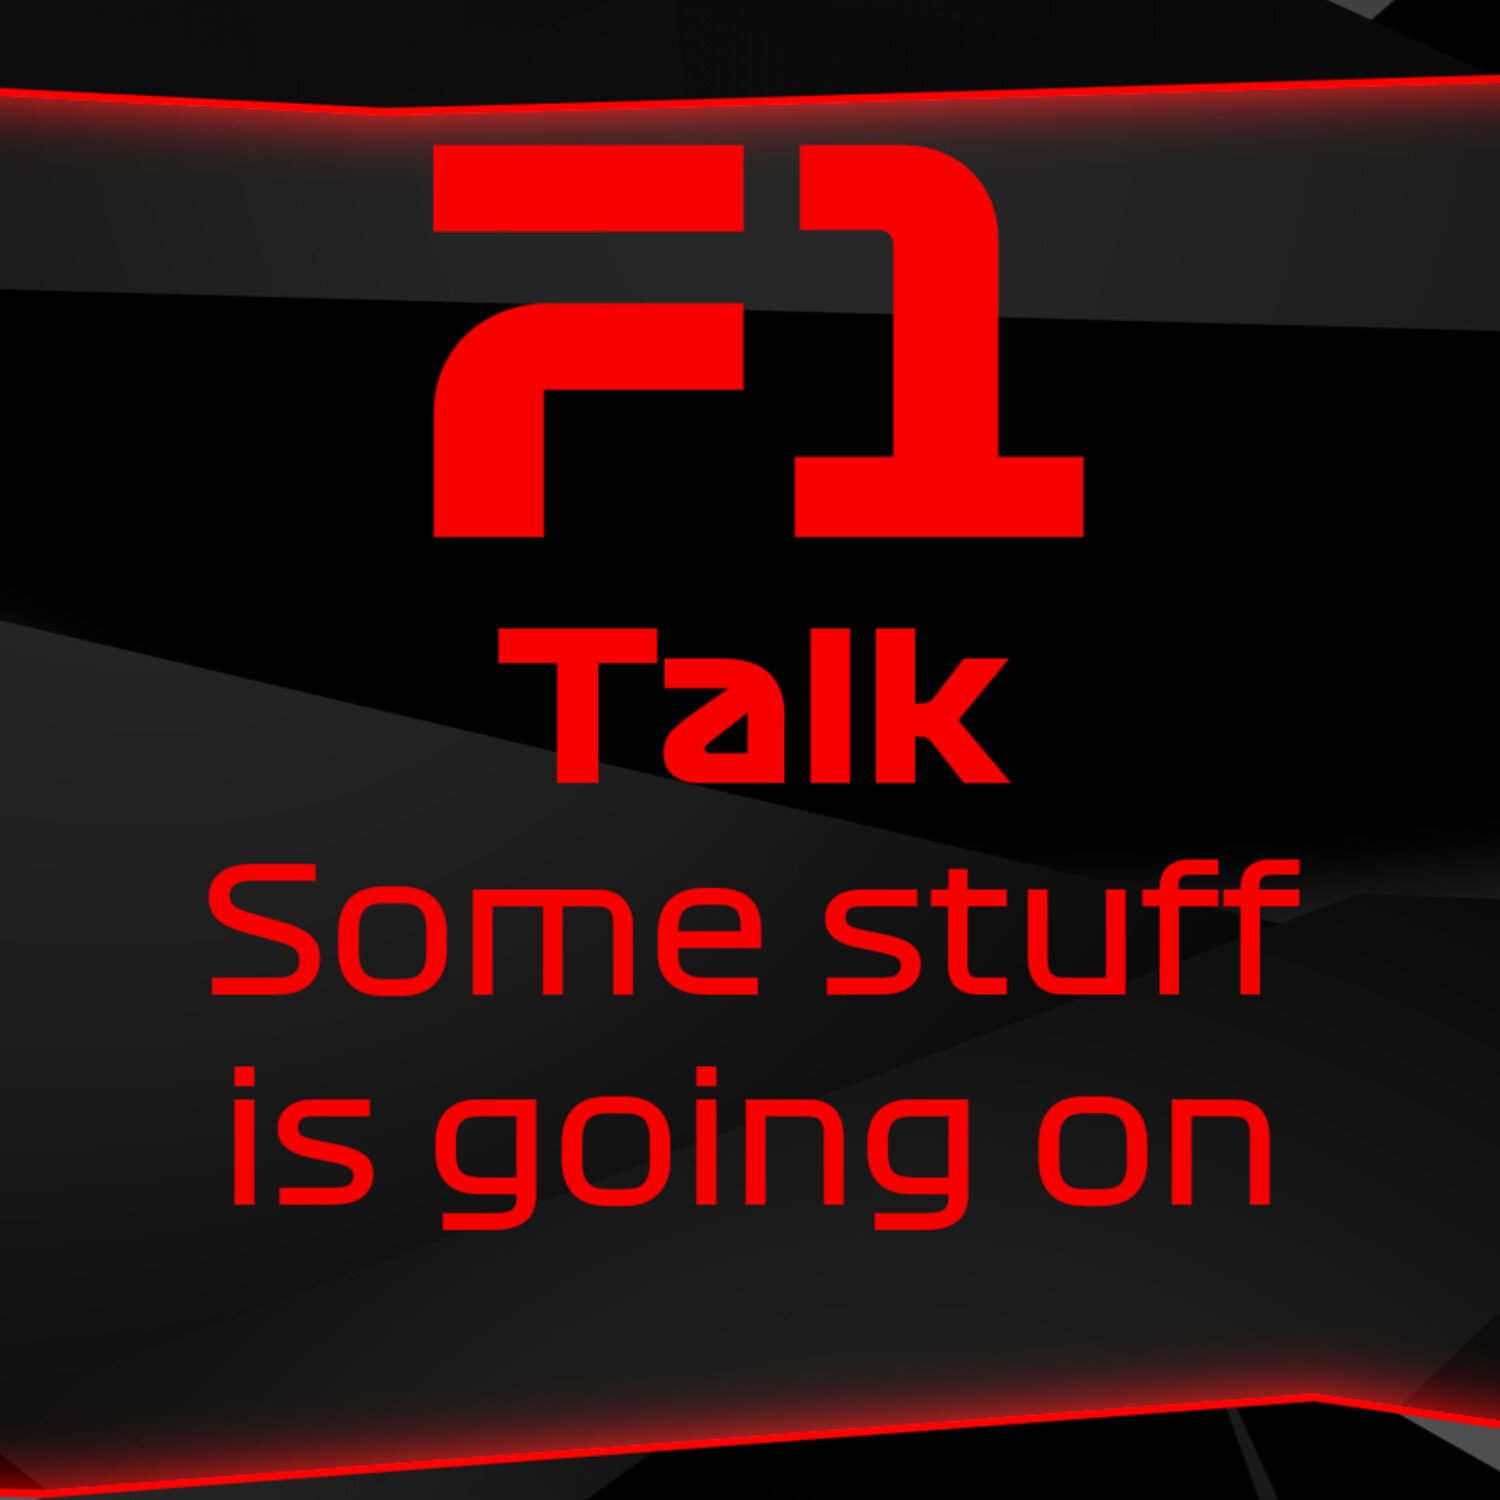 #F1 Talk, Some stuff is going on